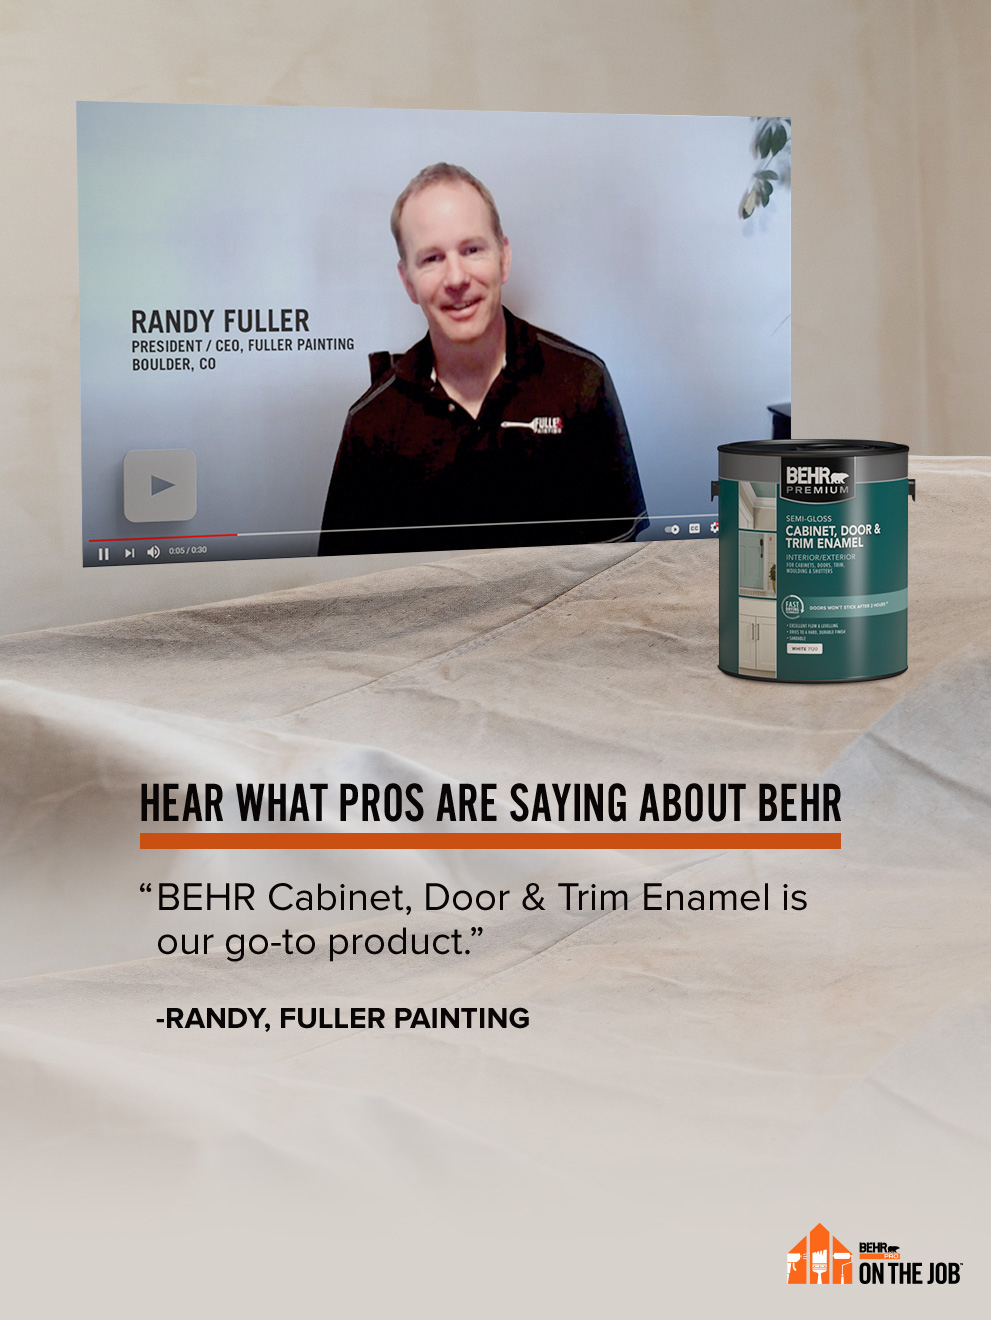 Hear What the Pro's are Saying About BEHR